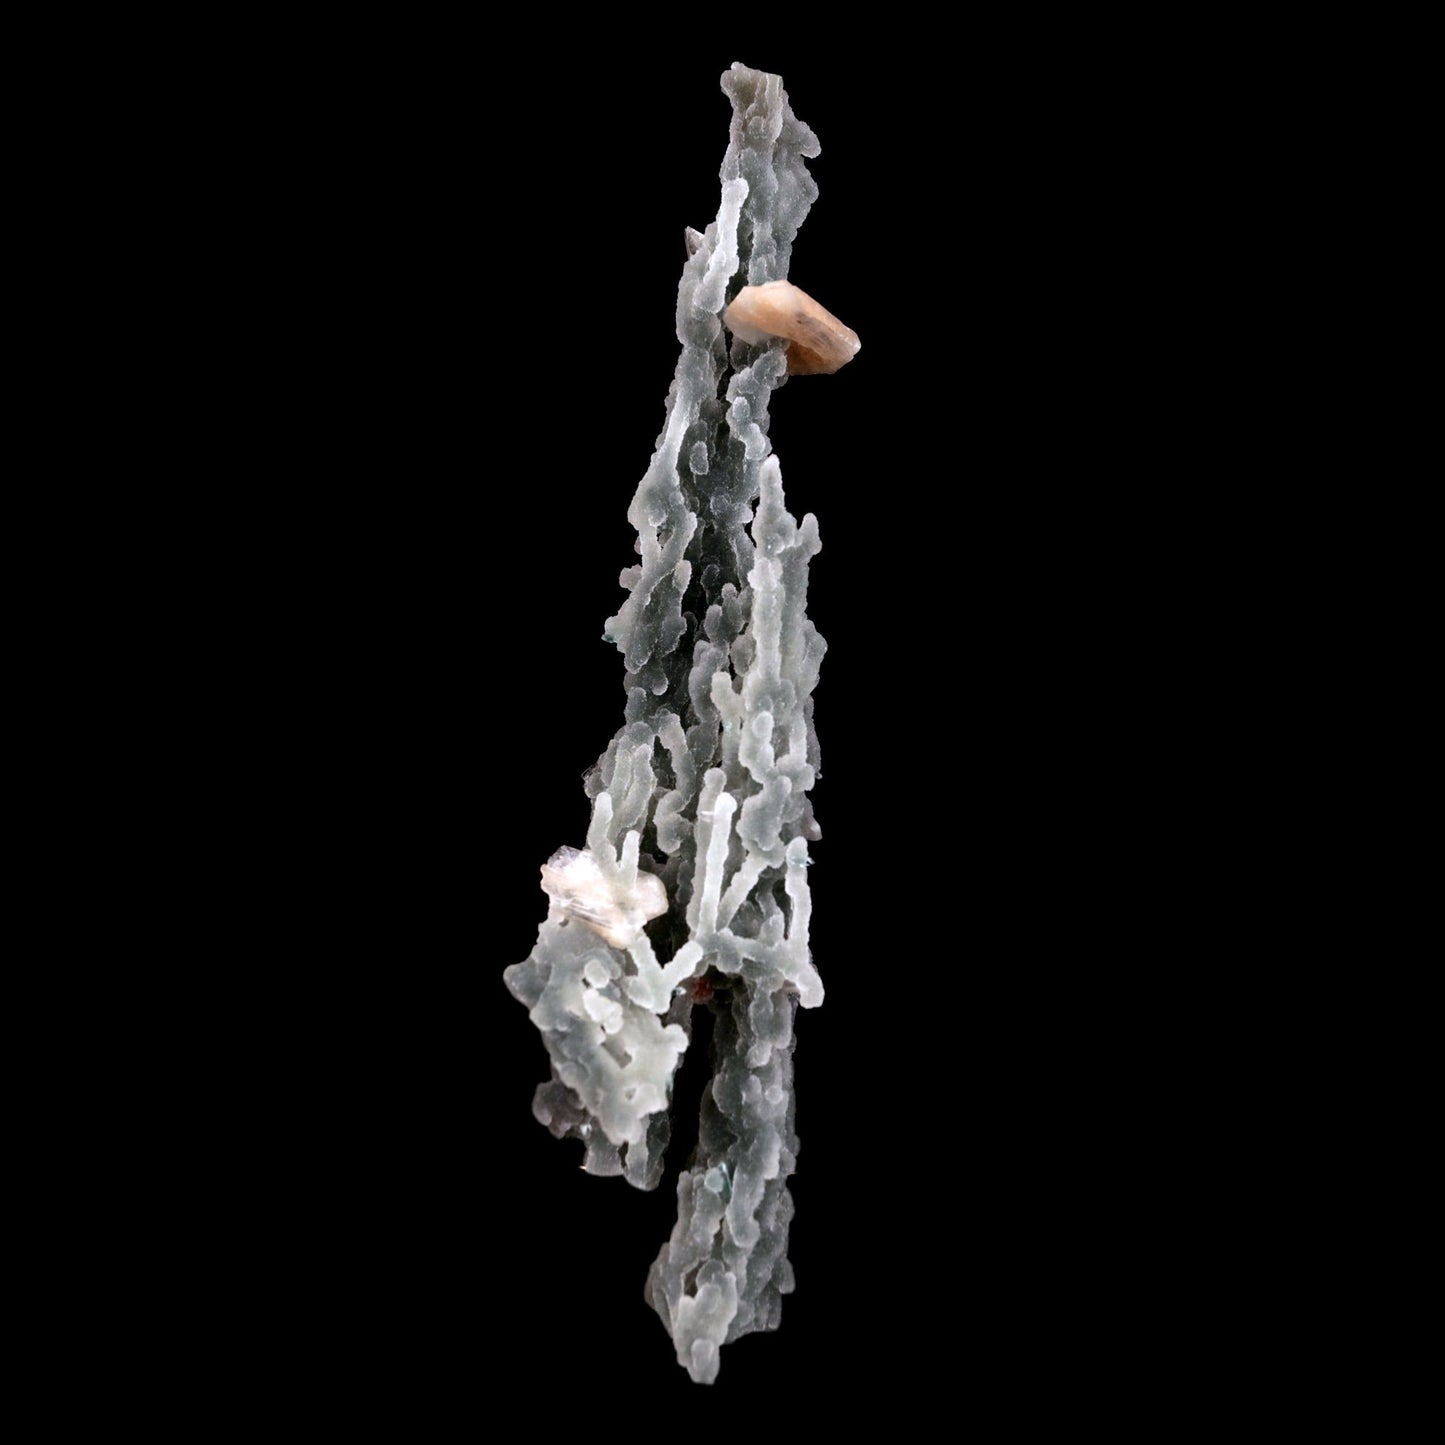 Stilbite on Chalcedony Stalactites Natural Mineral Specimen # B 4828  https://www.superbminerals.us/products/stilbite-on-chalcedony-stalactites-natural-mineral-specimen-b-4828  Features: Stalactites of drusy greenish-gray chalcedony dangle from a stunning corsage of iridescent, salmon-pink stilbite bowties. The matrix is highly sculptural.With only a few touched stalactite tips, this piece is essentially flawless and looks great from all angles!Outstanding huge Jalgaon combo 